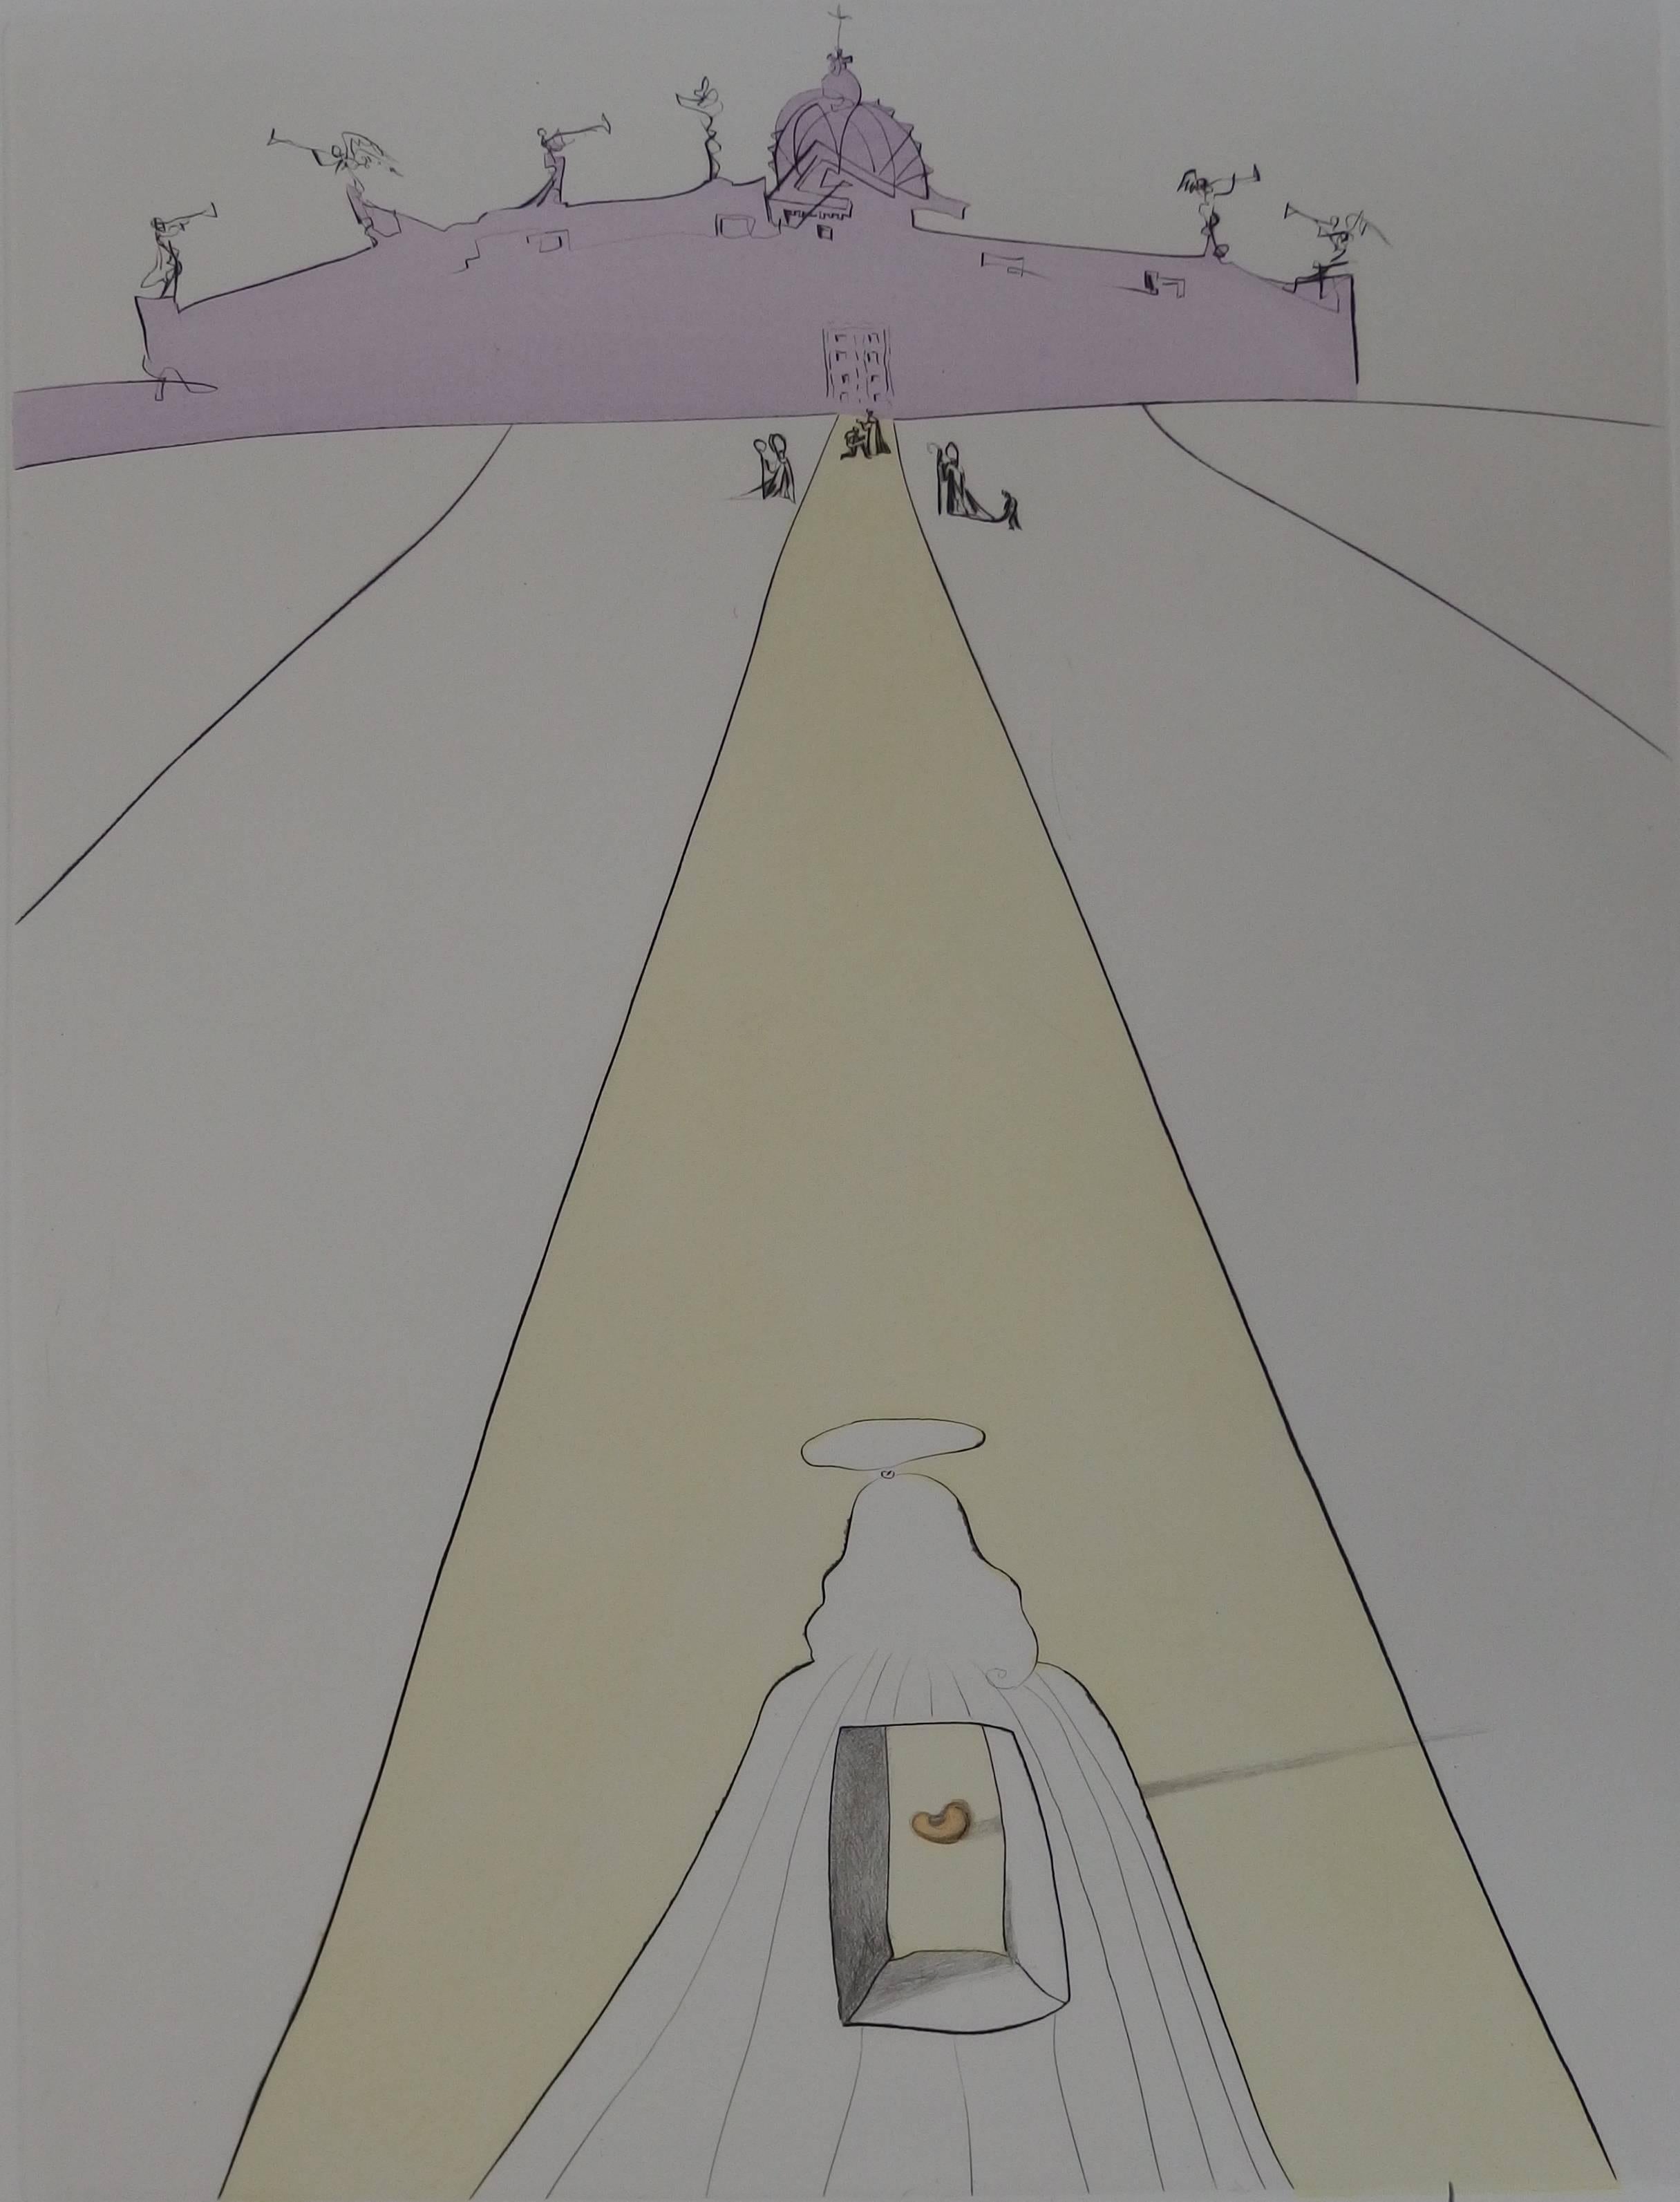 God, Time, Space, and the Pope – God, Time, Space, and the Pope – Radierung – signiert – 1974 (Surrealismus), Print, von Salvador Dalí